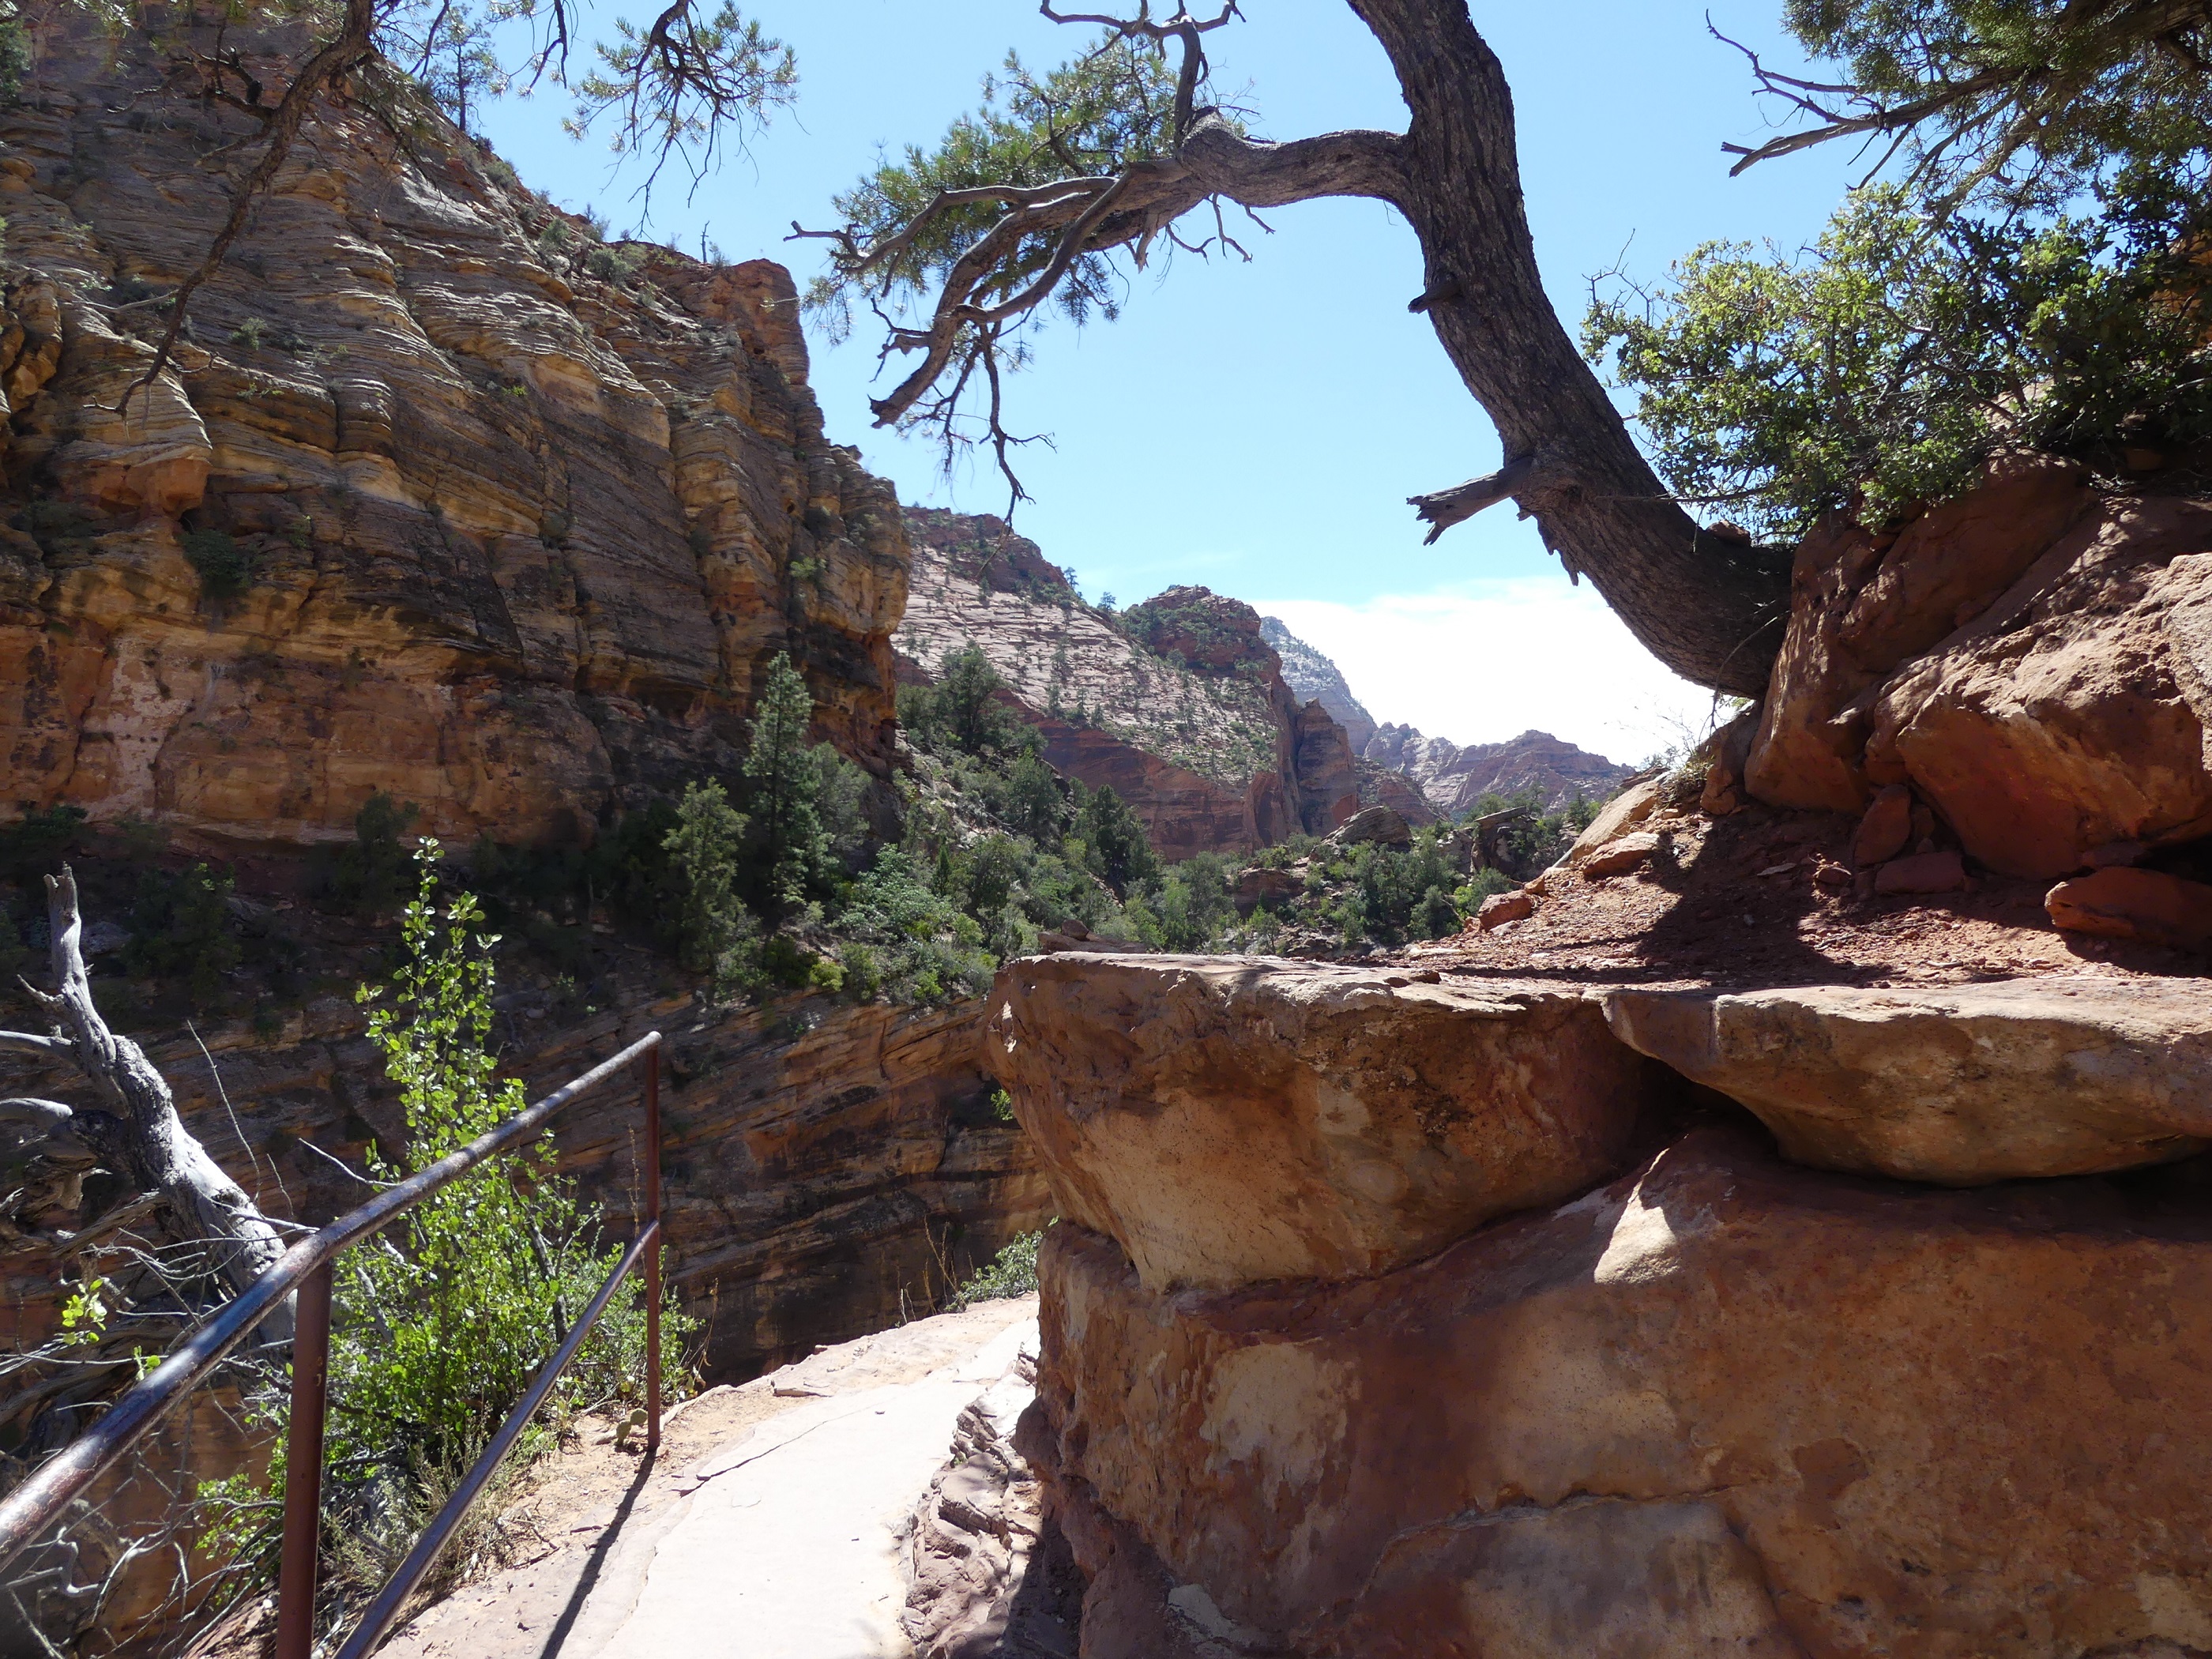 Canyon overlook trail